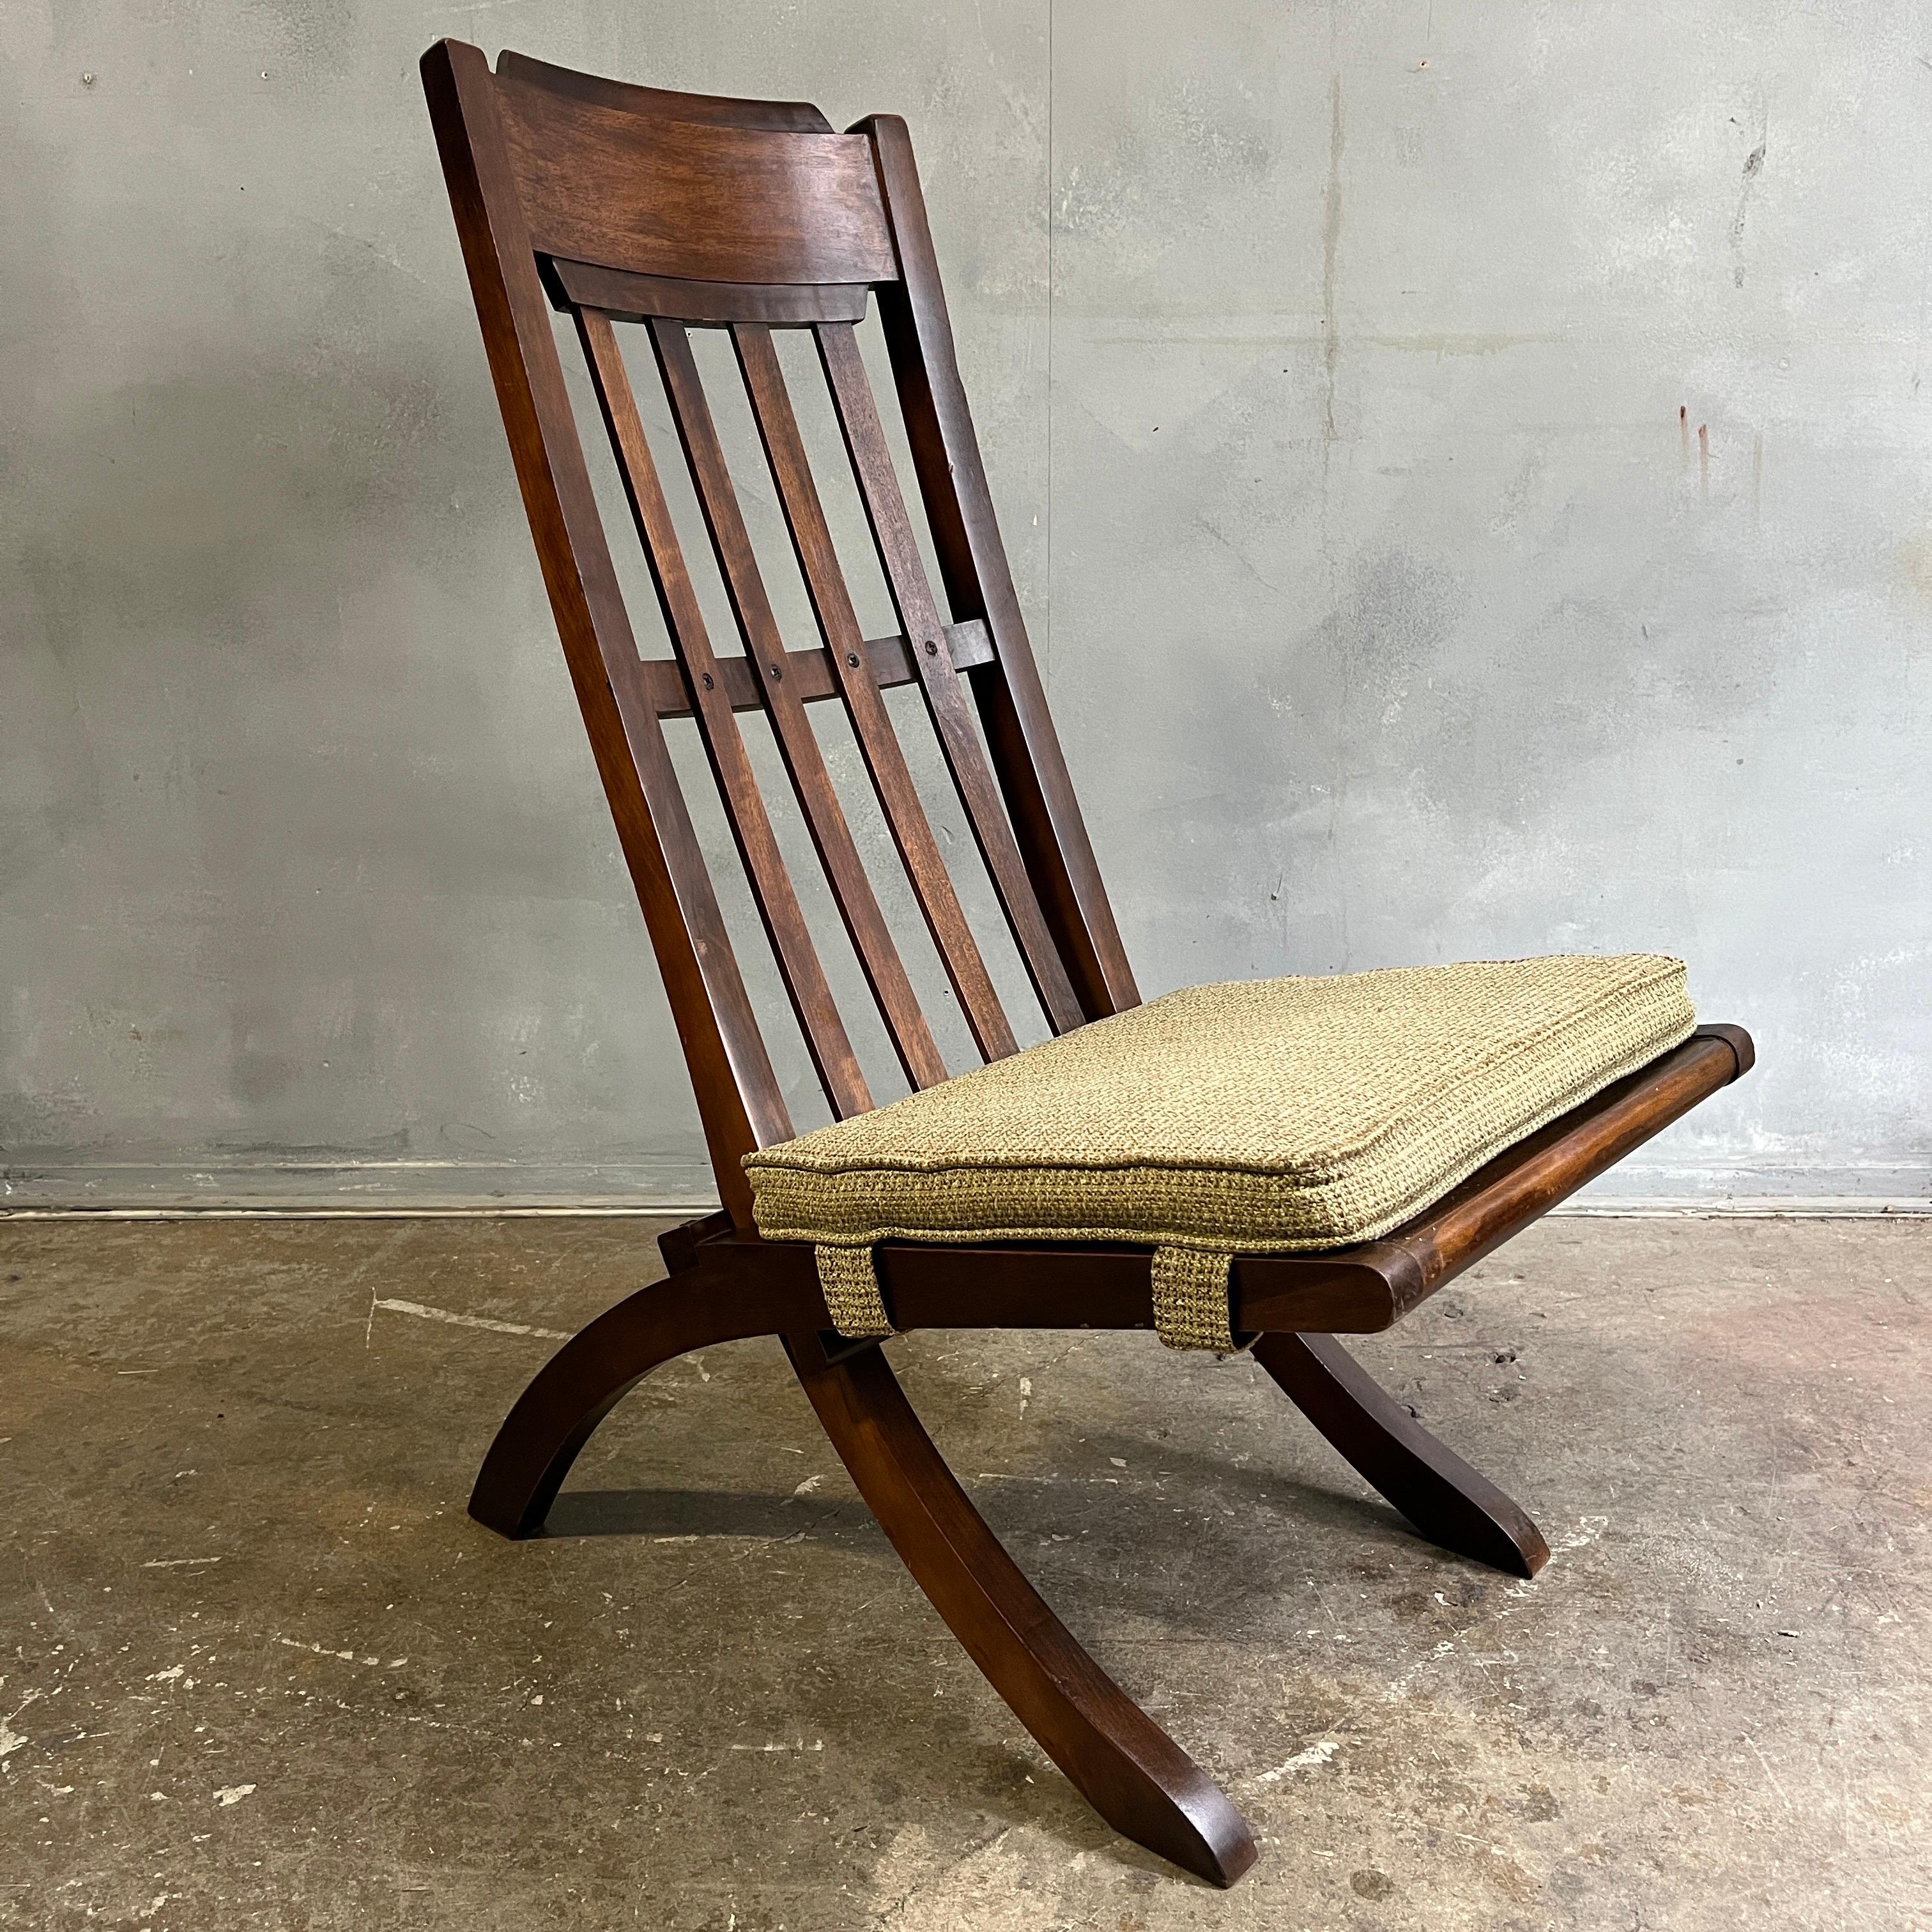 For your consideration is this Mid-Century Modern lounge or easy chair from the Perspective collection by Milo Baughman for Drexel in 1951. Crafted from exotic Mindoro wood that shimmers in the light. This chair is exceedingly rare and seldom seen.